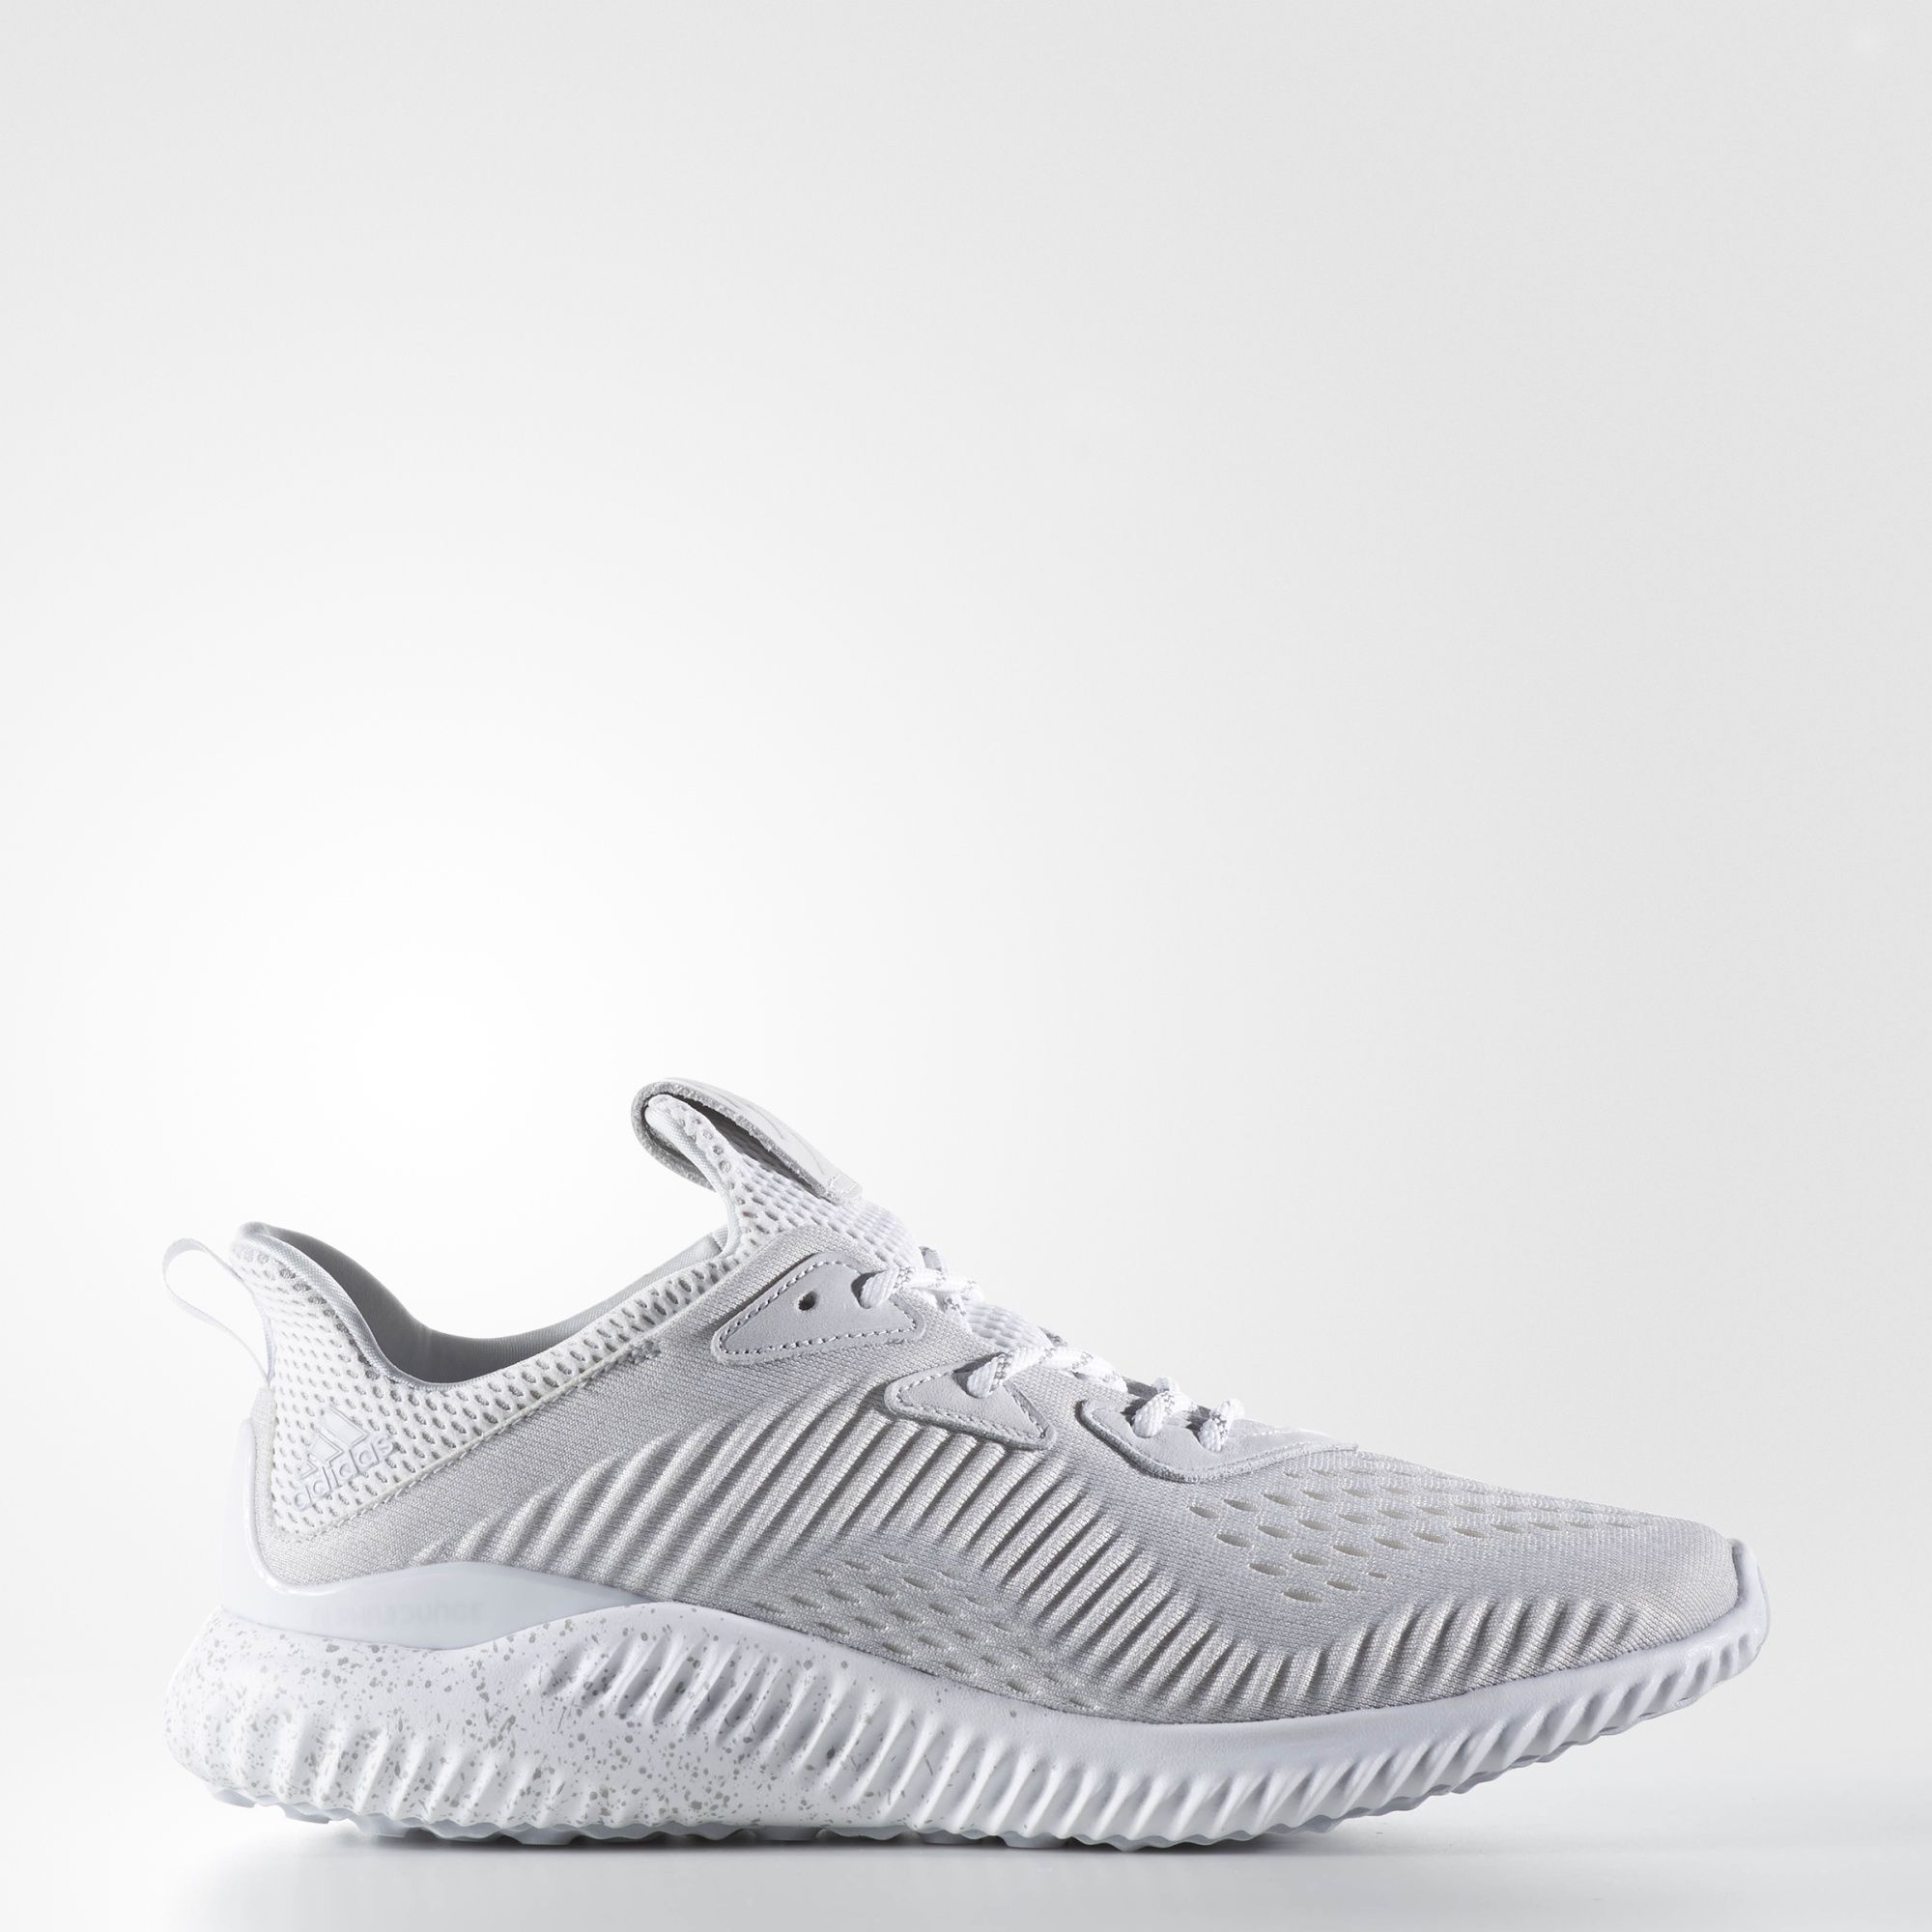 adidas-alphabounce-reigning-champ-2